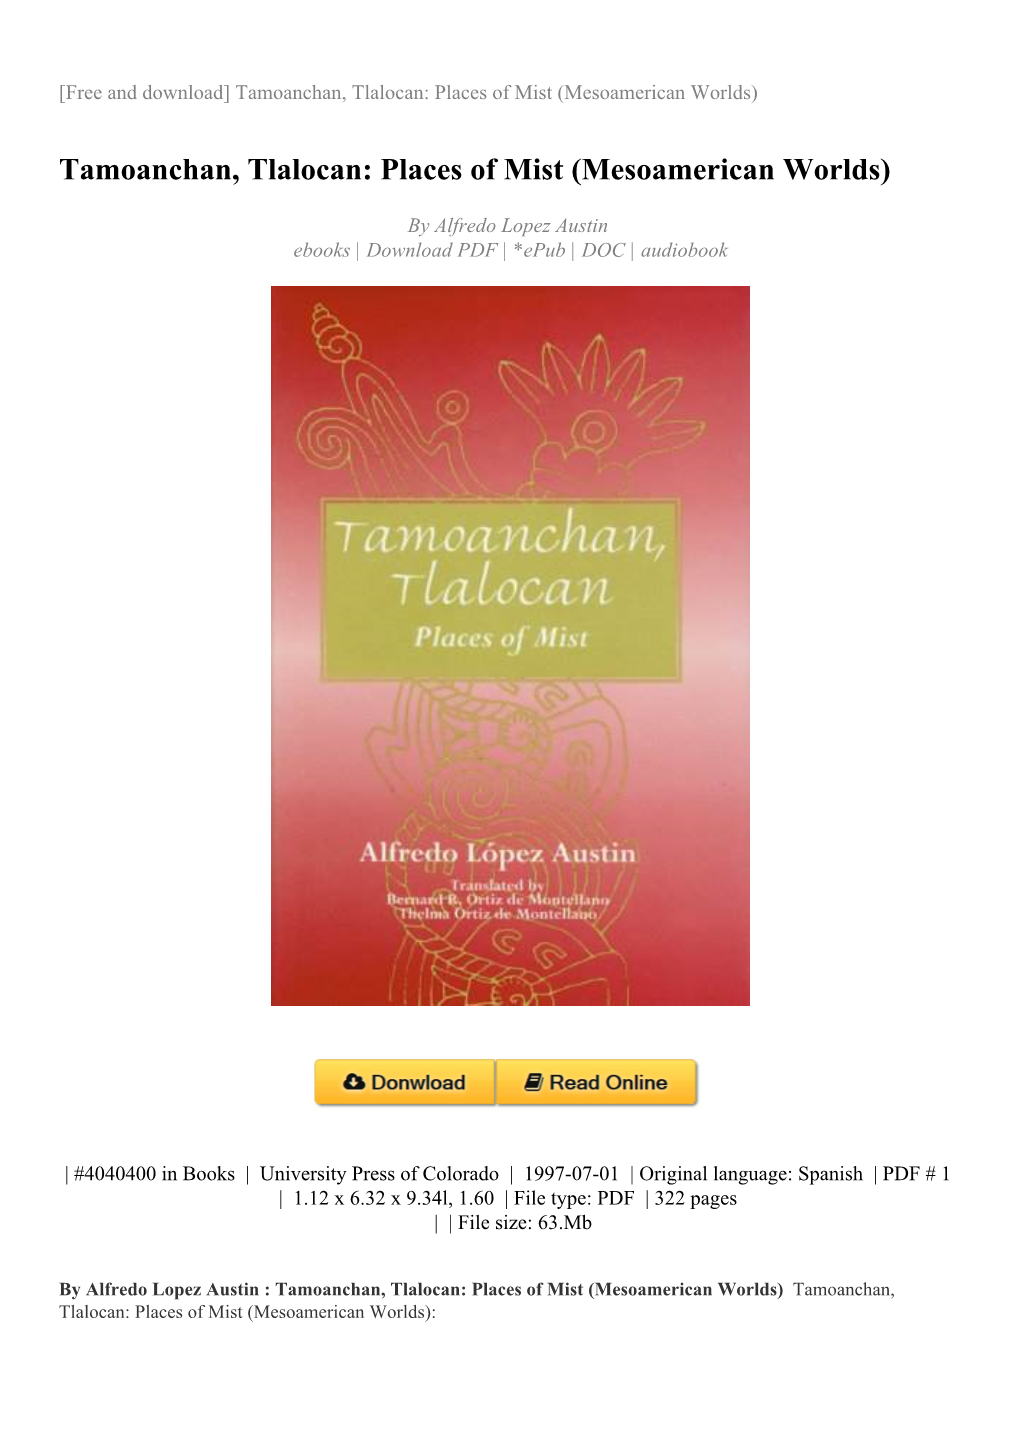 Tamoanchan, Tlalocan: Places of Mist (Mesoamerican Worlds)